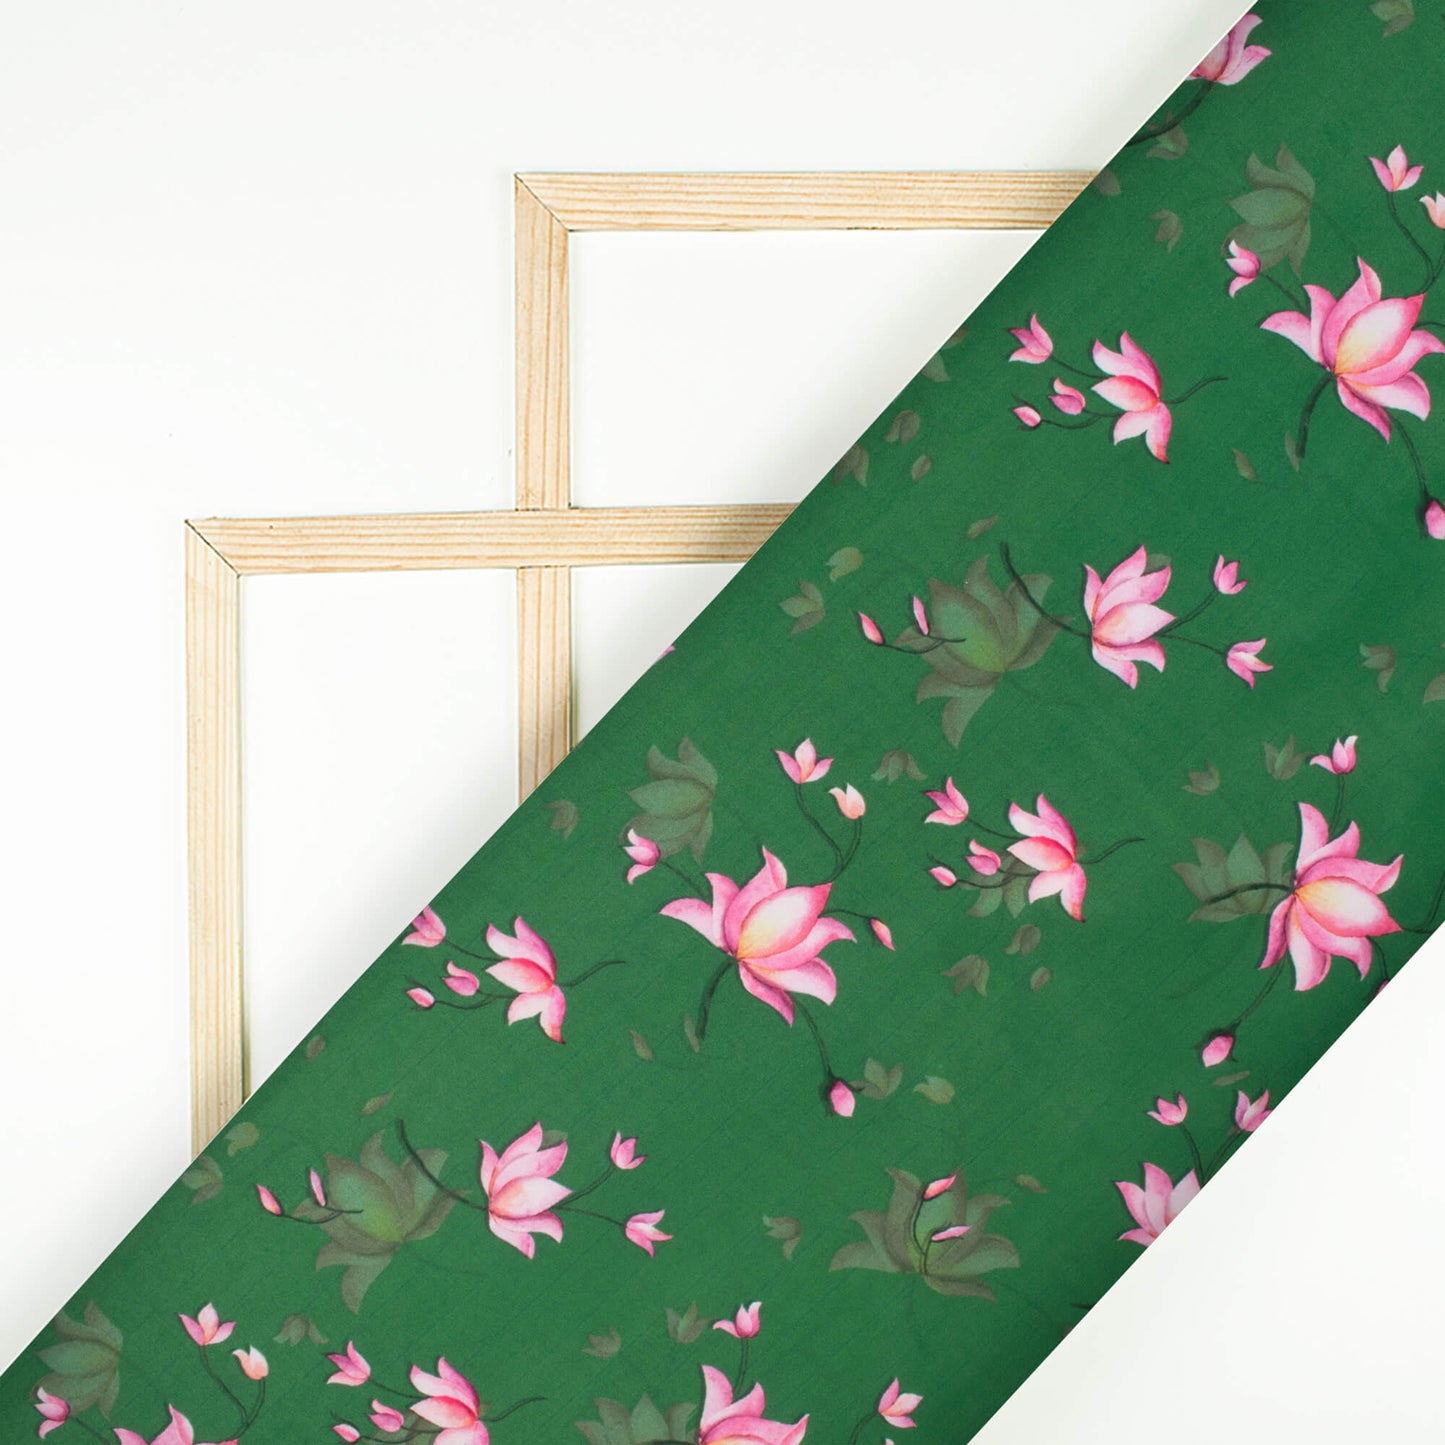 Grass Green And Taffy Pink Floral Pattern Digital Print Ultra Premium Butter Crepe Fabric